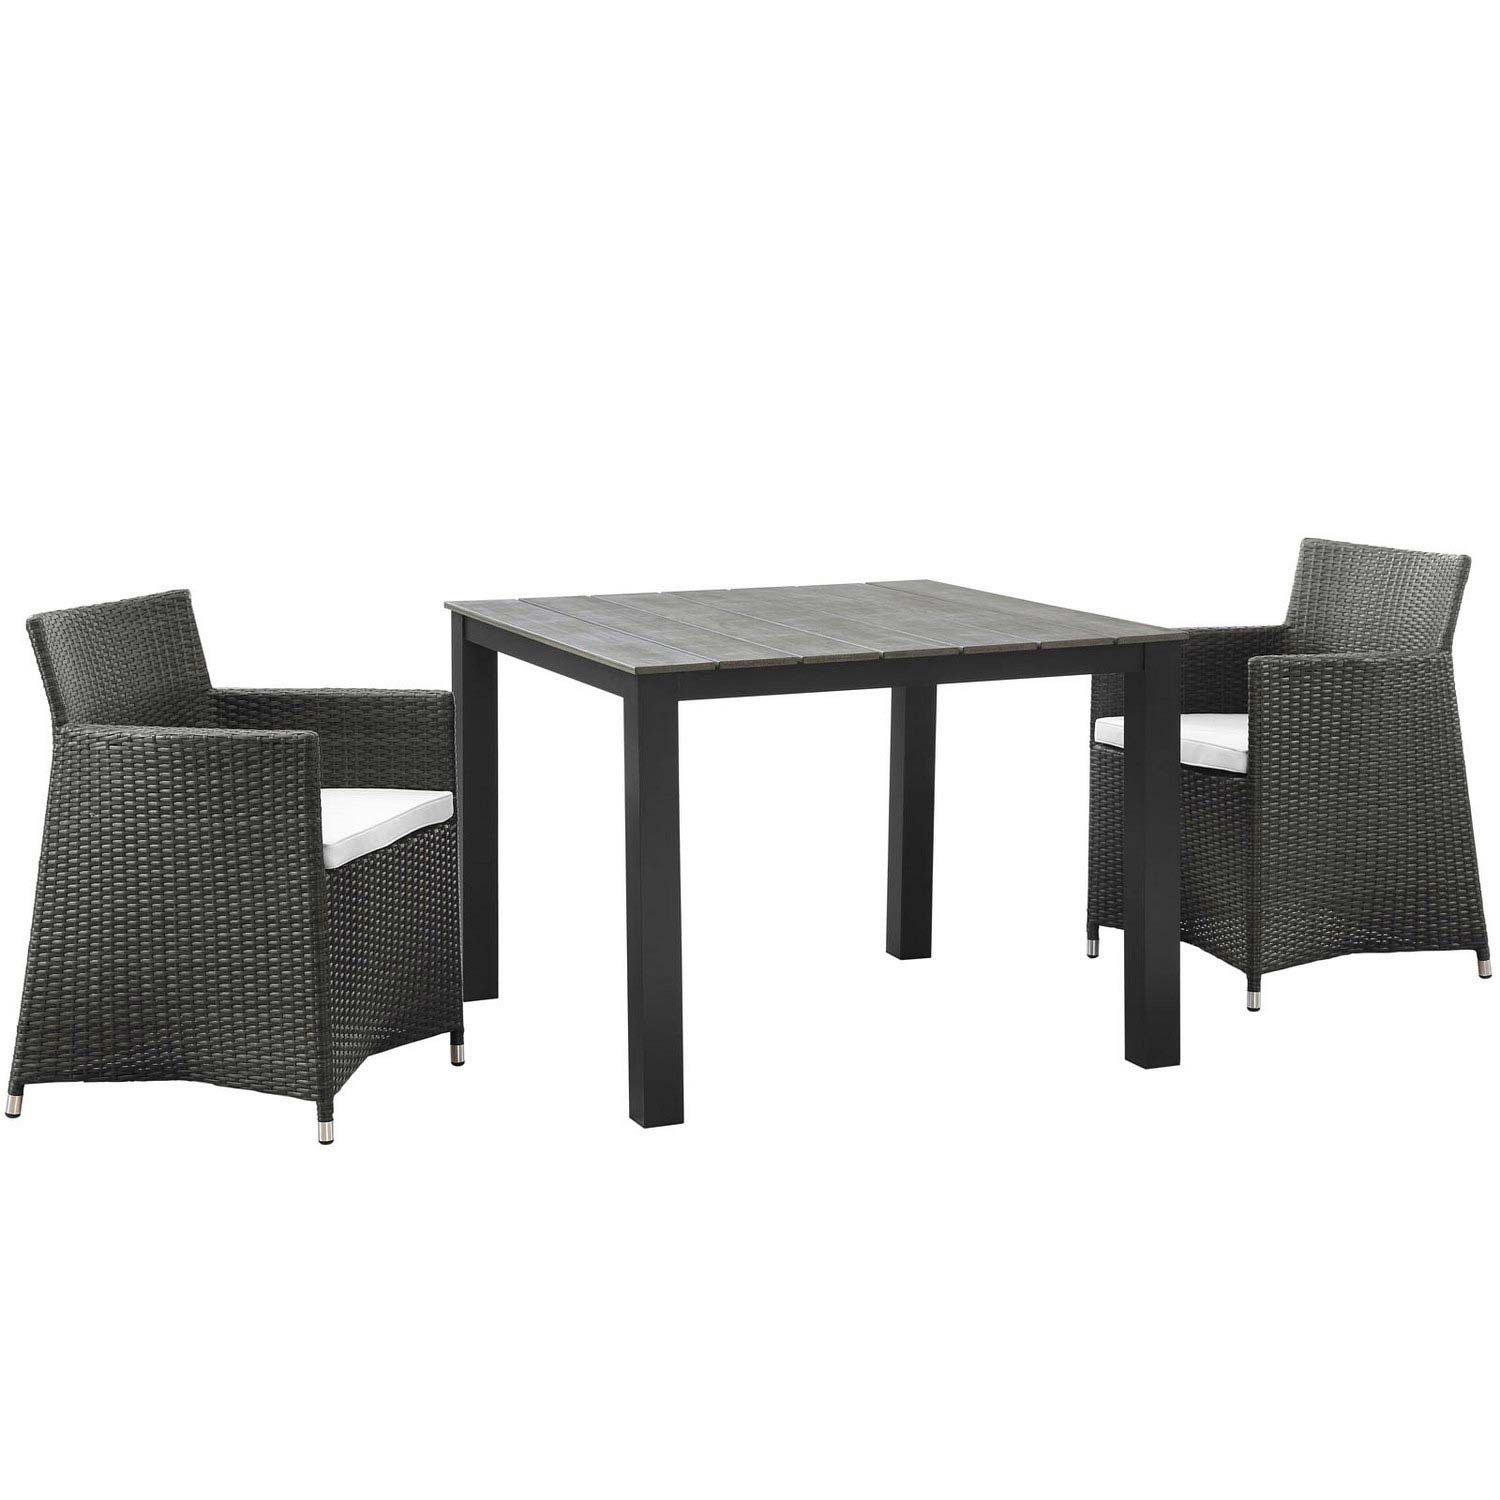 Modway Junction 3 Piece Outdoor Patio Wicker Dining Set - Brown/White